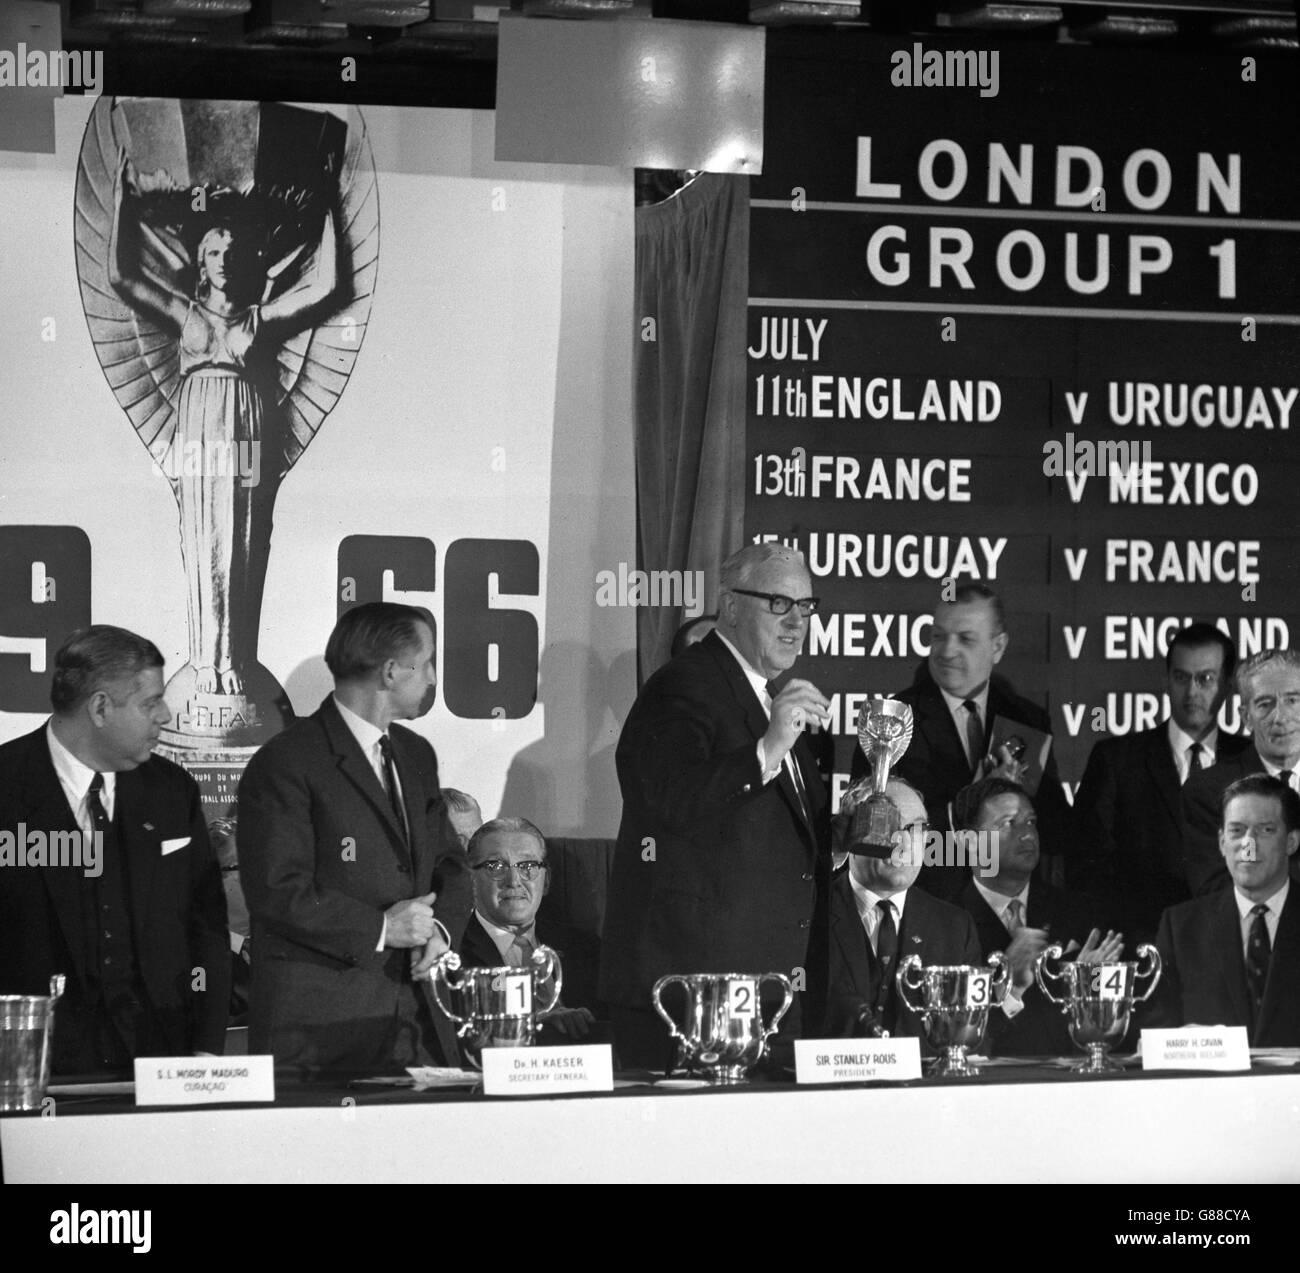 Sir Stanley Rous, President of FIFA, holding the World Championship Jules Rimet Cup at the Royal Garden Hotel in Kensington, where he presided over the draw for the competition to be held in England in July. With him at the table are (l-r) SL Mordy Maduro, Helmet Kaeser, Harry H Cavan, and the Earl of Harewood. Stock Photo